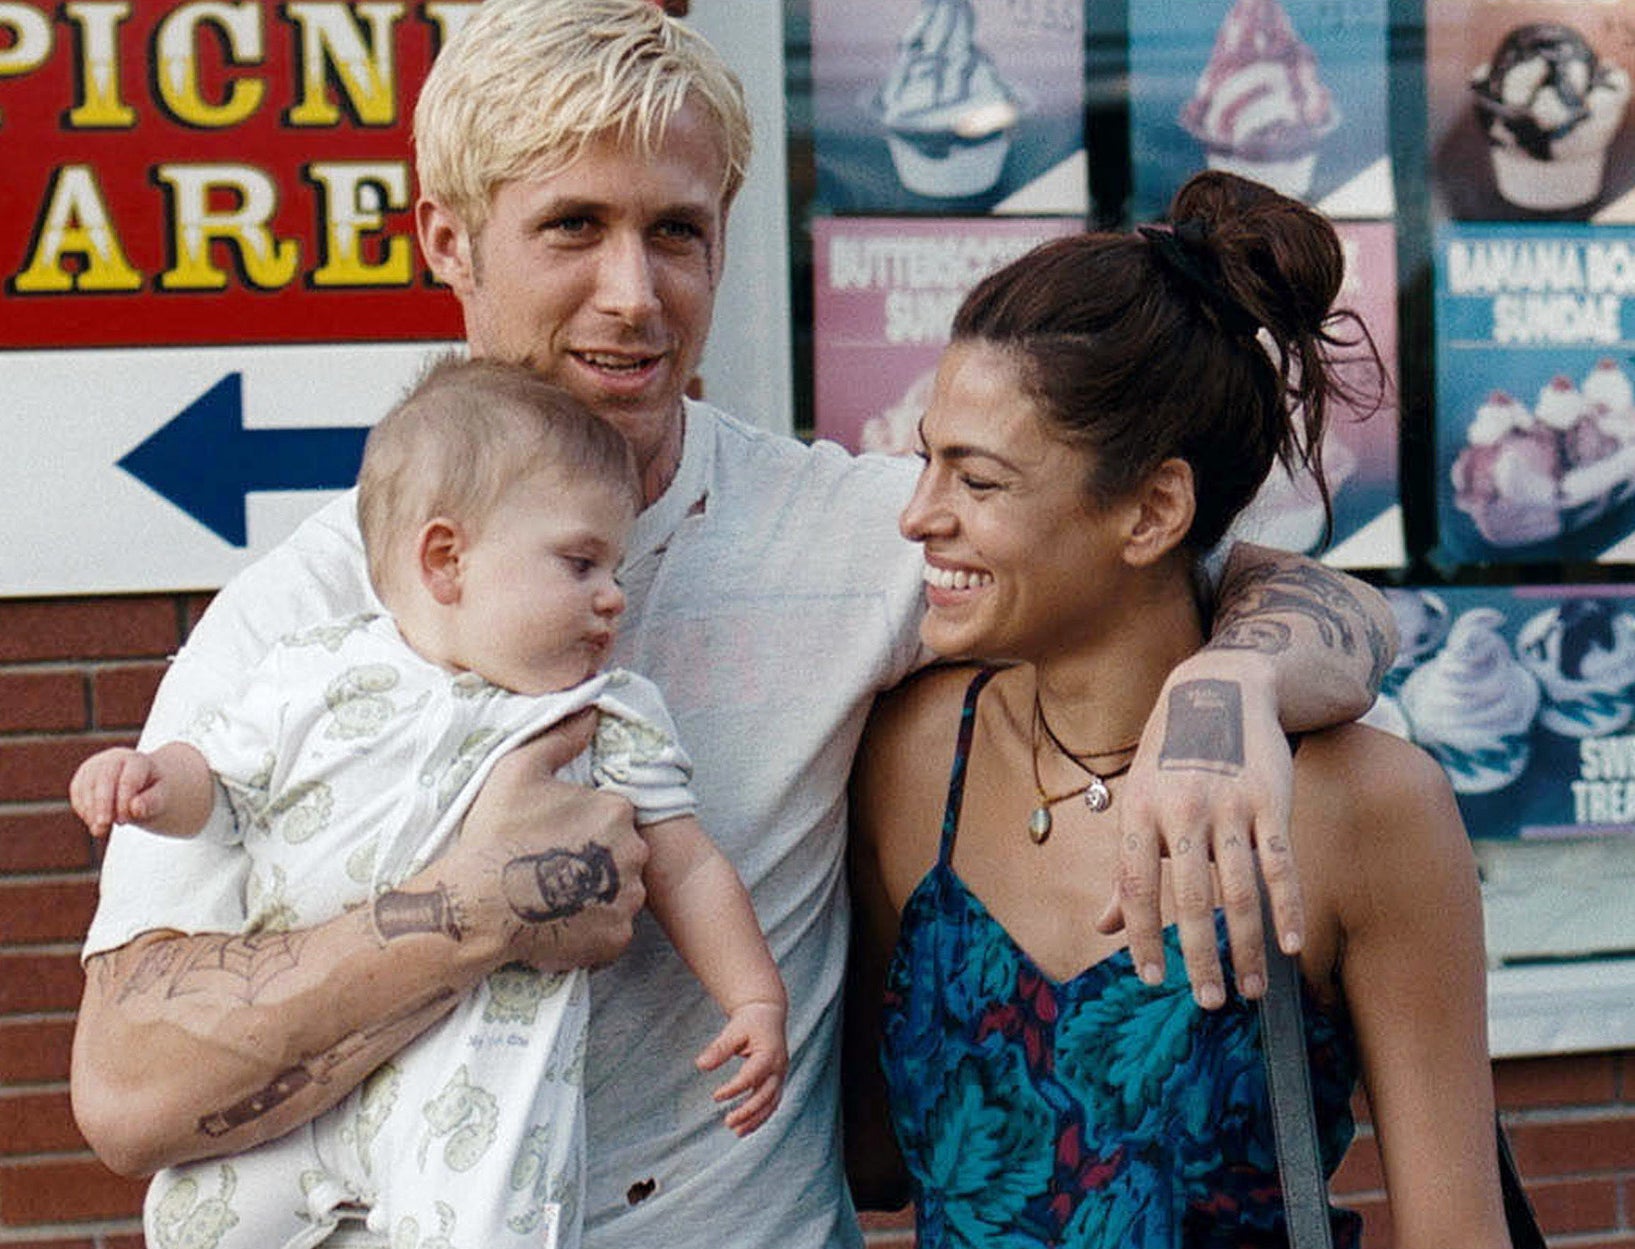 Eva and Ryan pose together on set with an infant